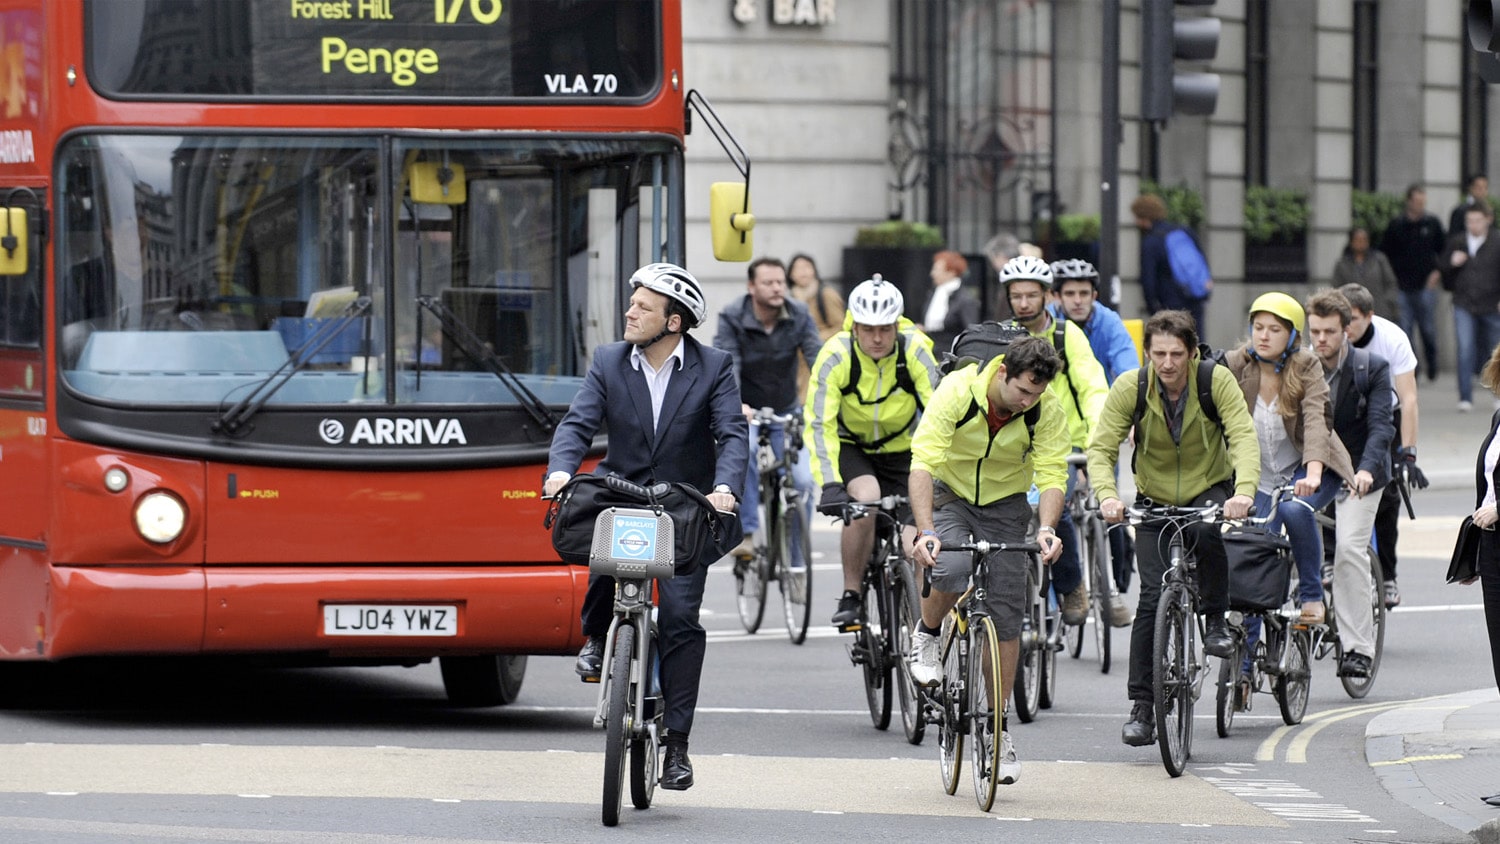 “Having worked in London almost 10 years ago, I was amazed recently by the hugely improved diversity of cyclists there” Credit: <a href='https://bikebiz.com/artificial-intelligence-to-help-fuel-londons-cycling-boom/'>bikebiz.com</a>